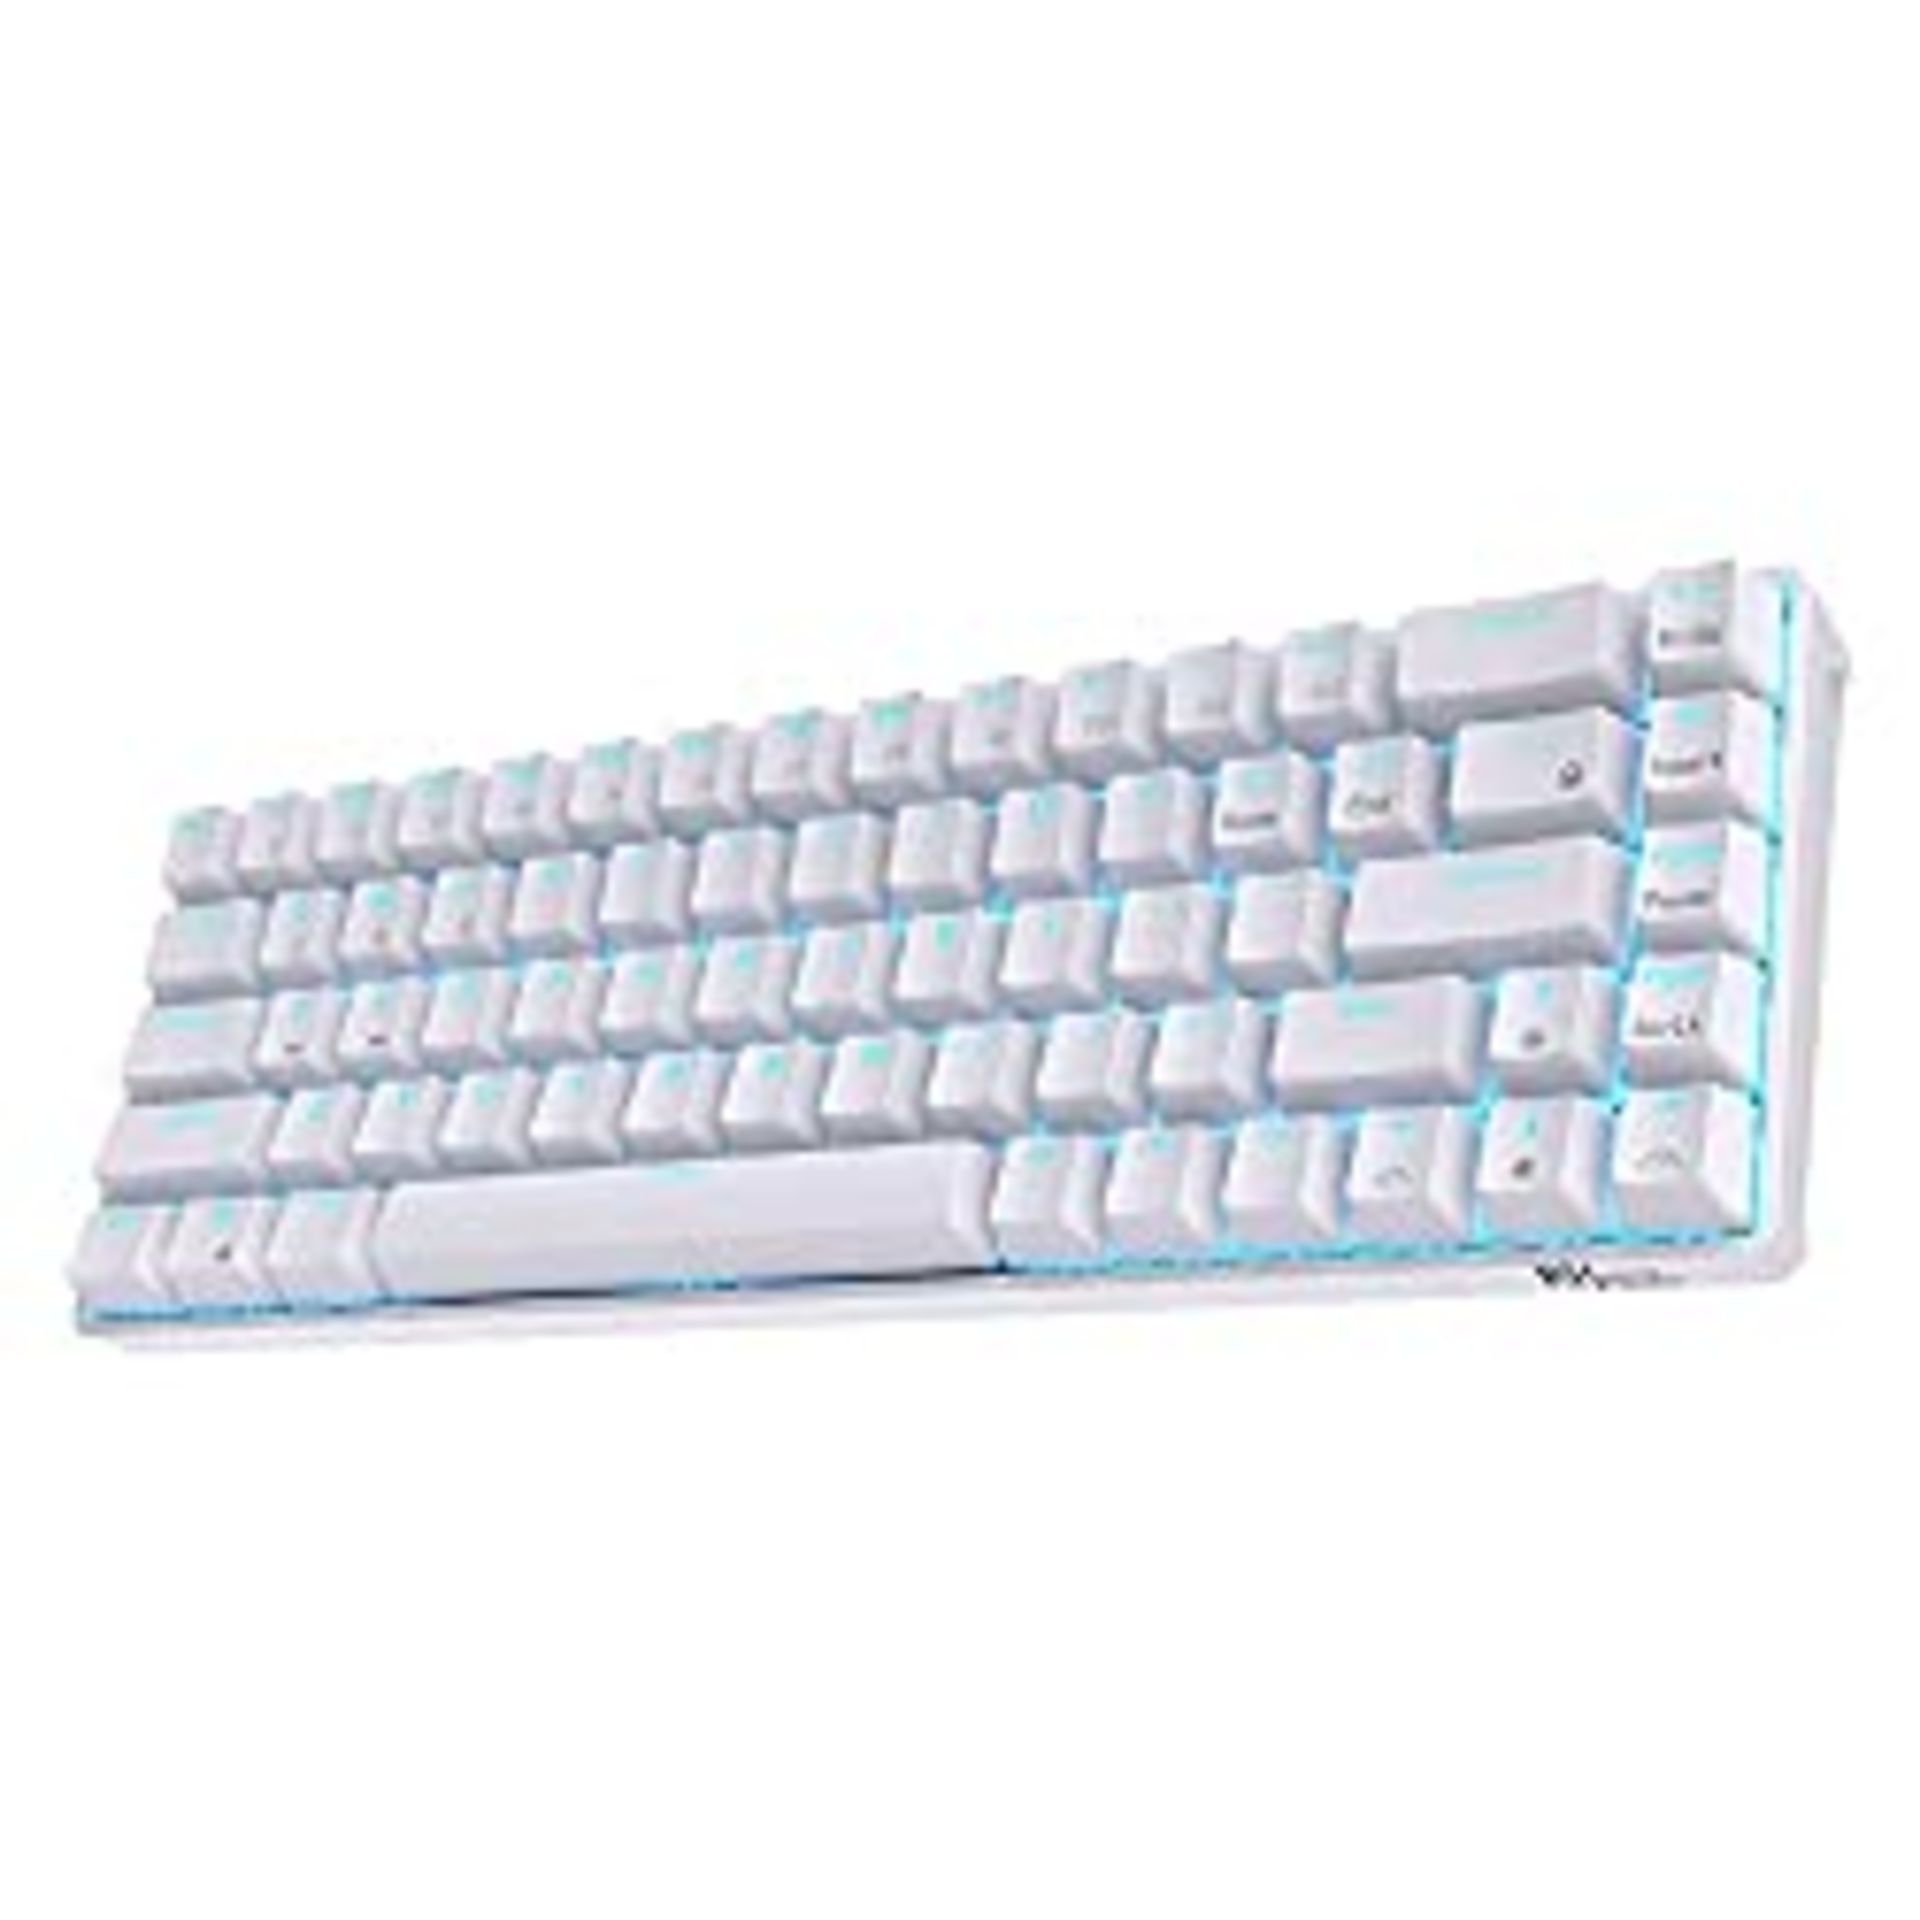 RRP £64.84 RK ROYAL KLUDGE RK68 65% Hot-Swappable Wireless Mechanical Keyboard